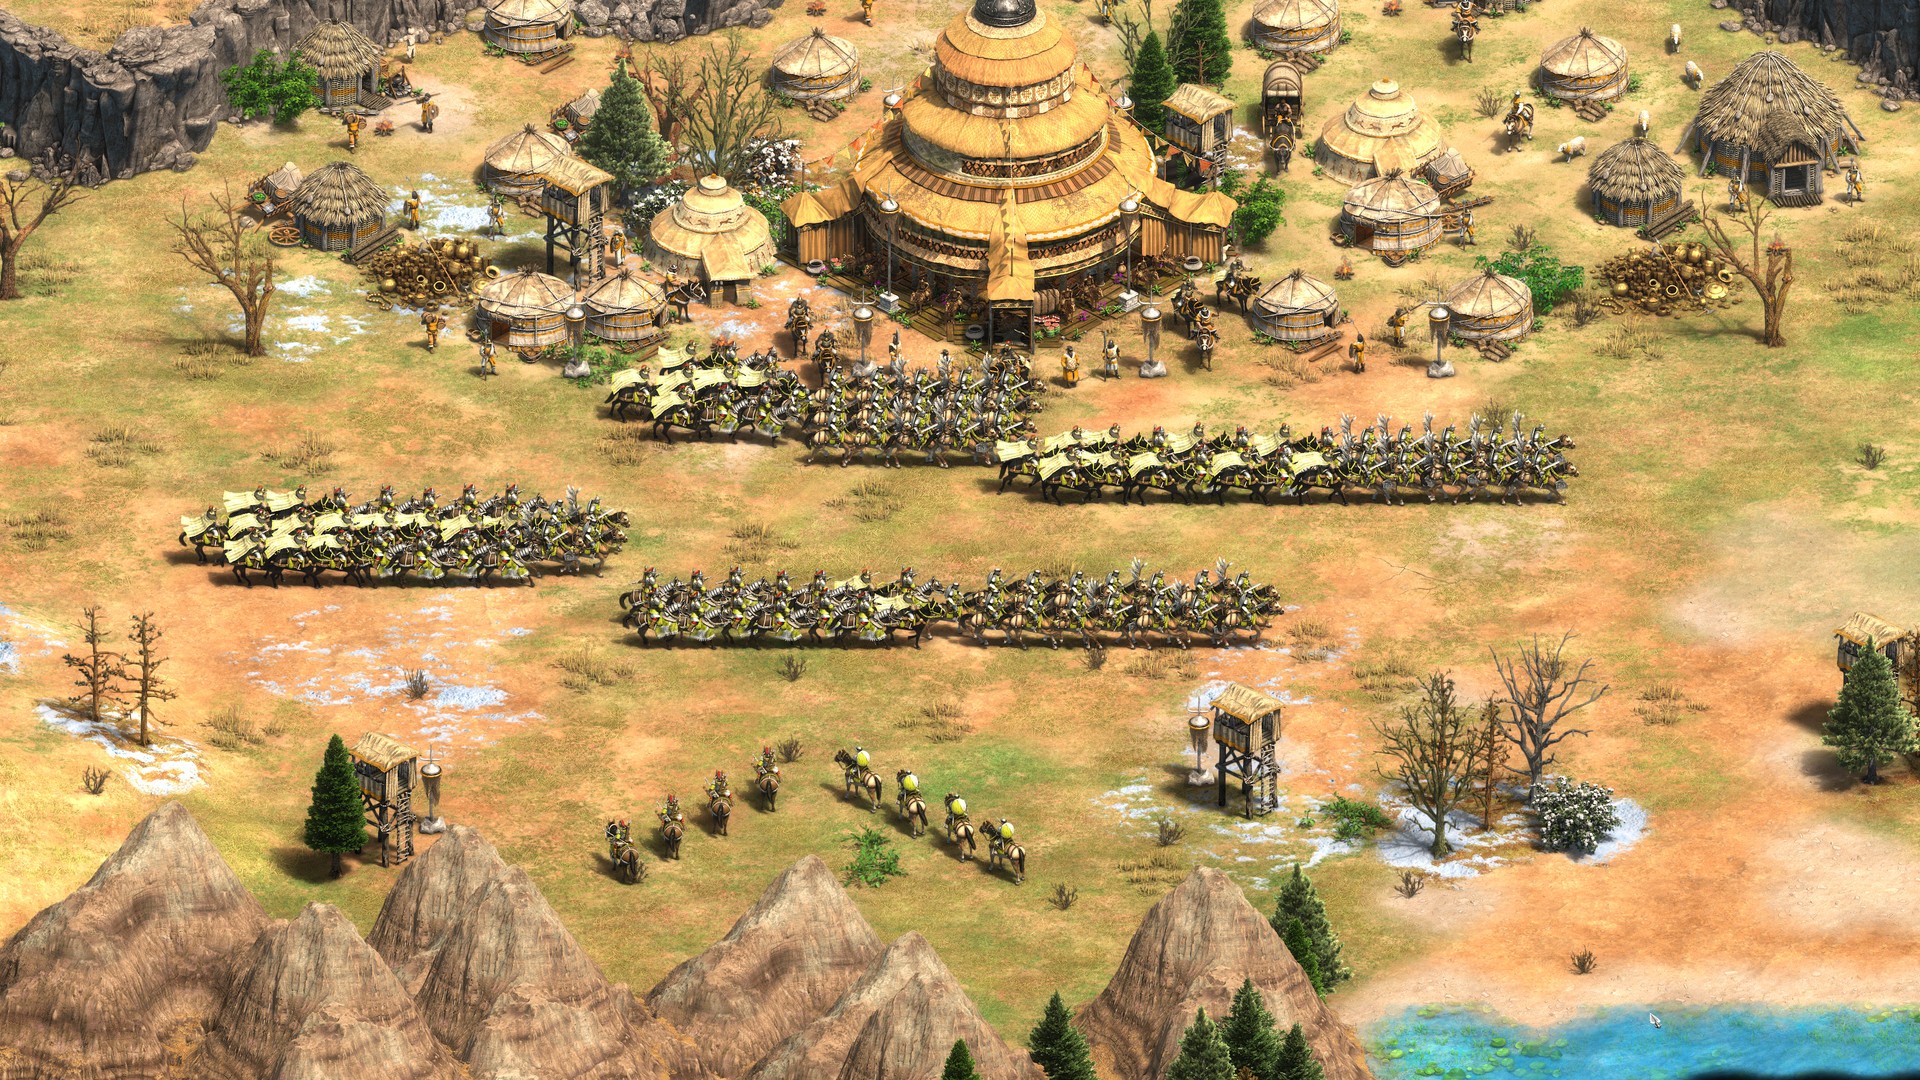 download age of empire 2 hd